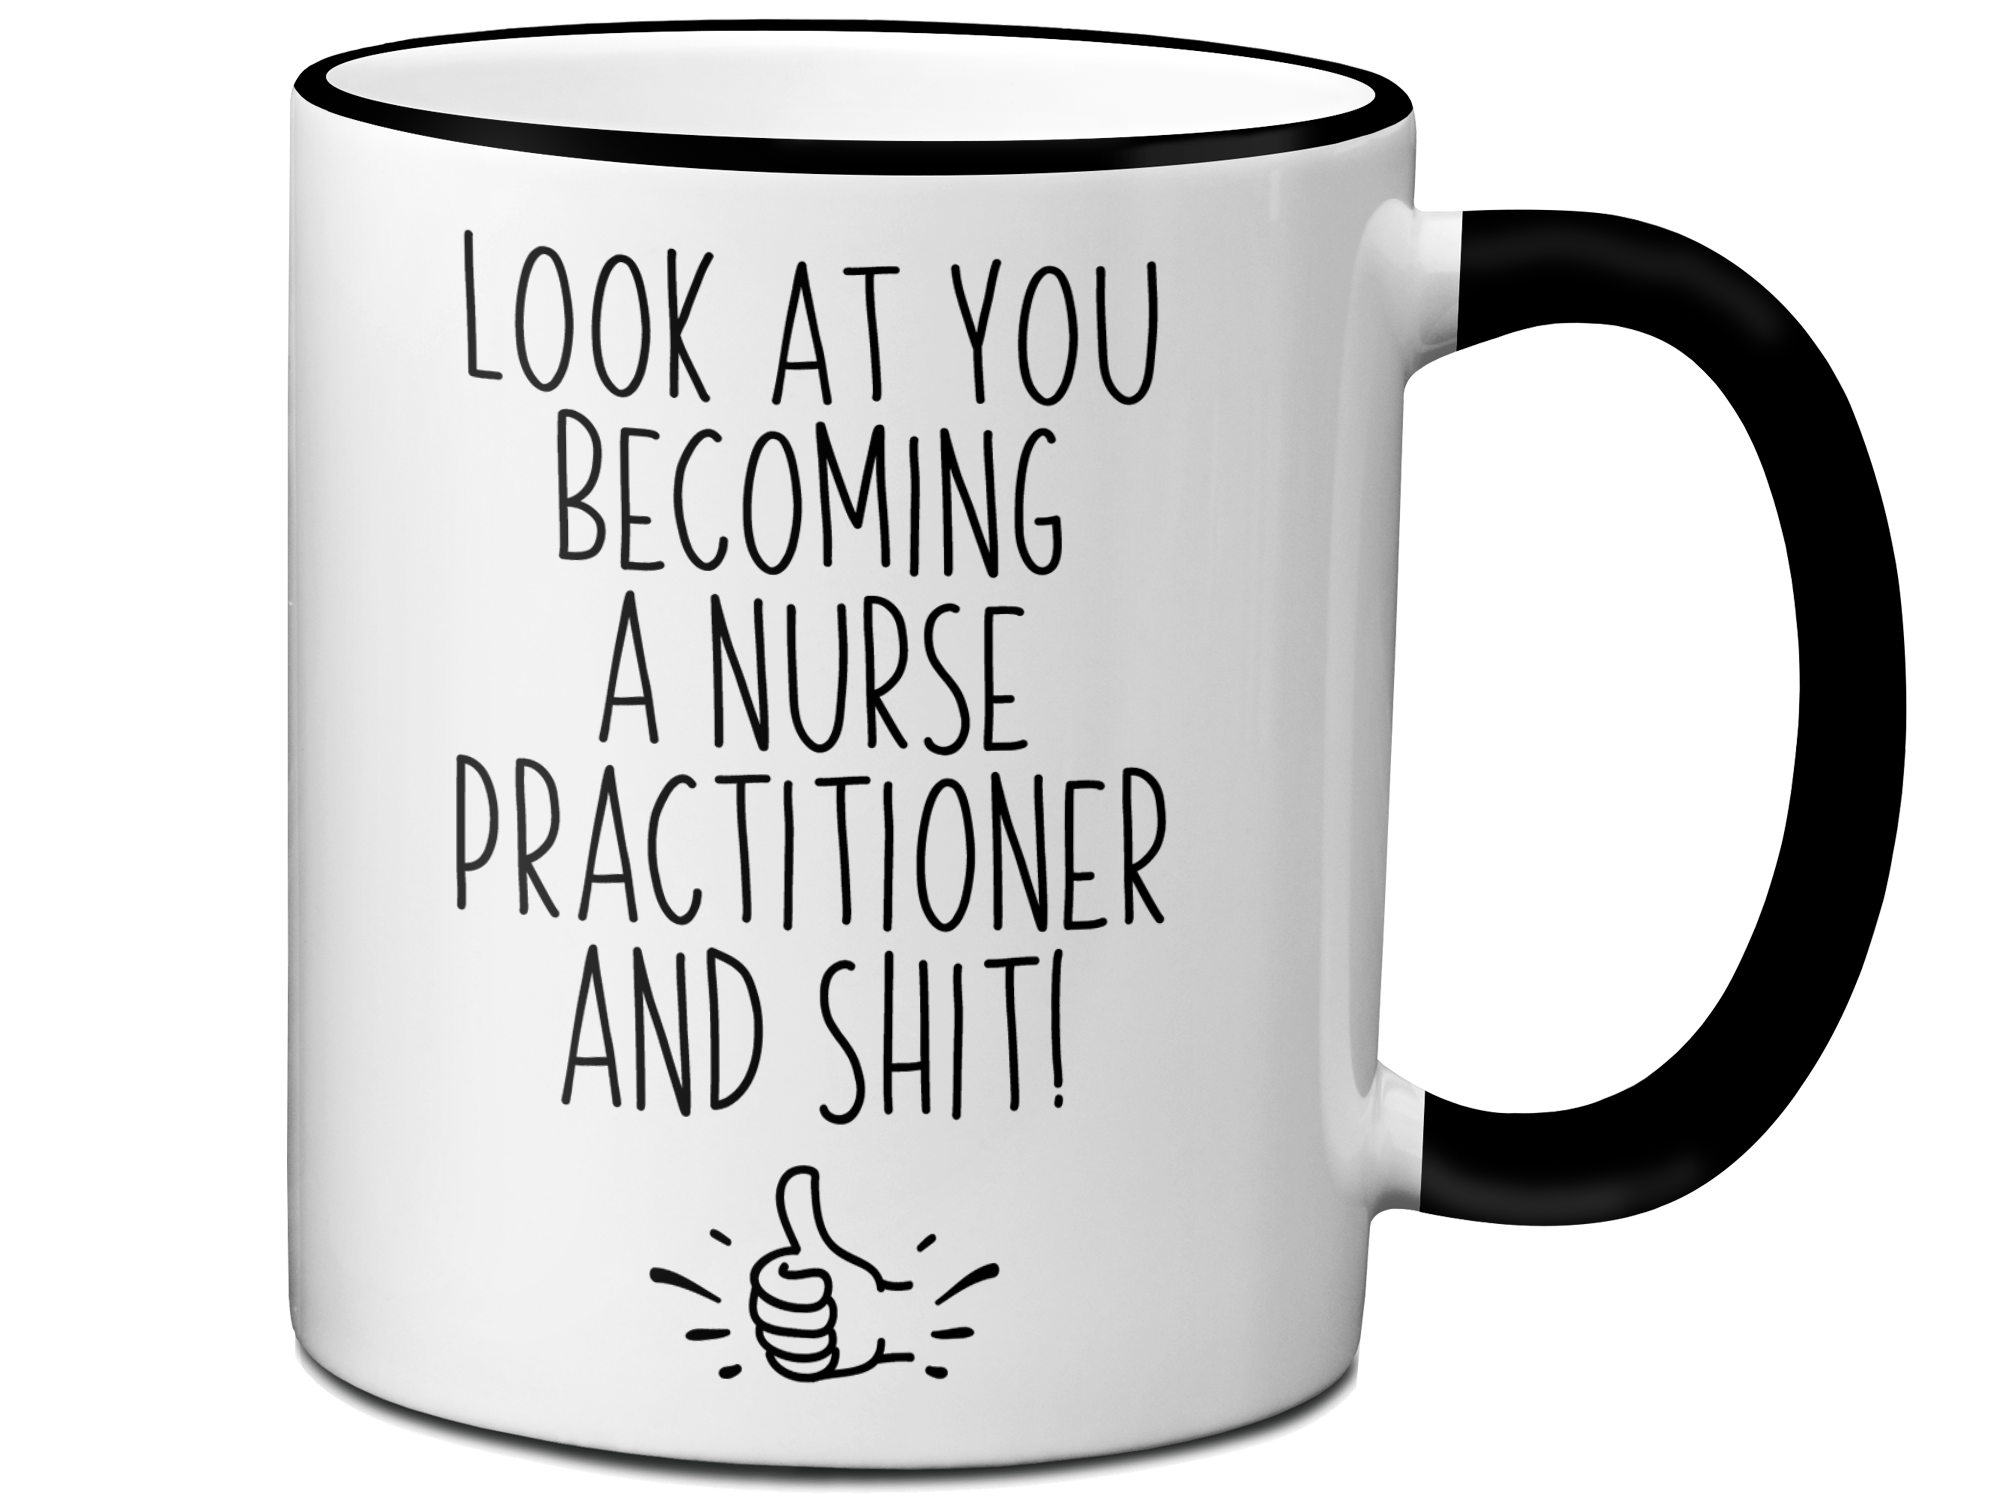 Nurse Practitioner Graduation Gifts - Look at You Becoming a Nurse Practitioner and Shit Funny Coffee Mug - NP Nurse Gift Idea